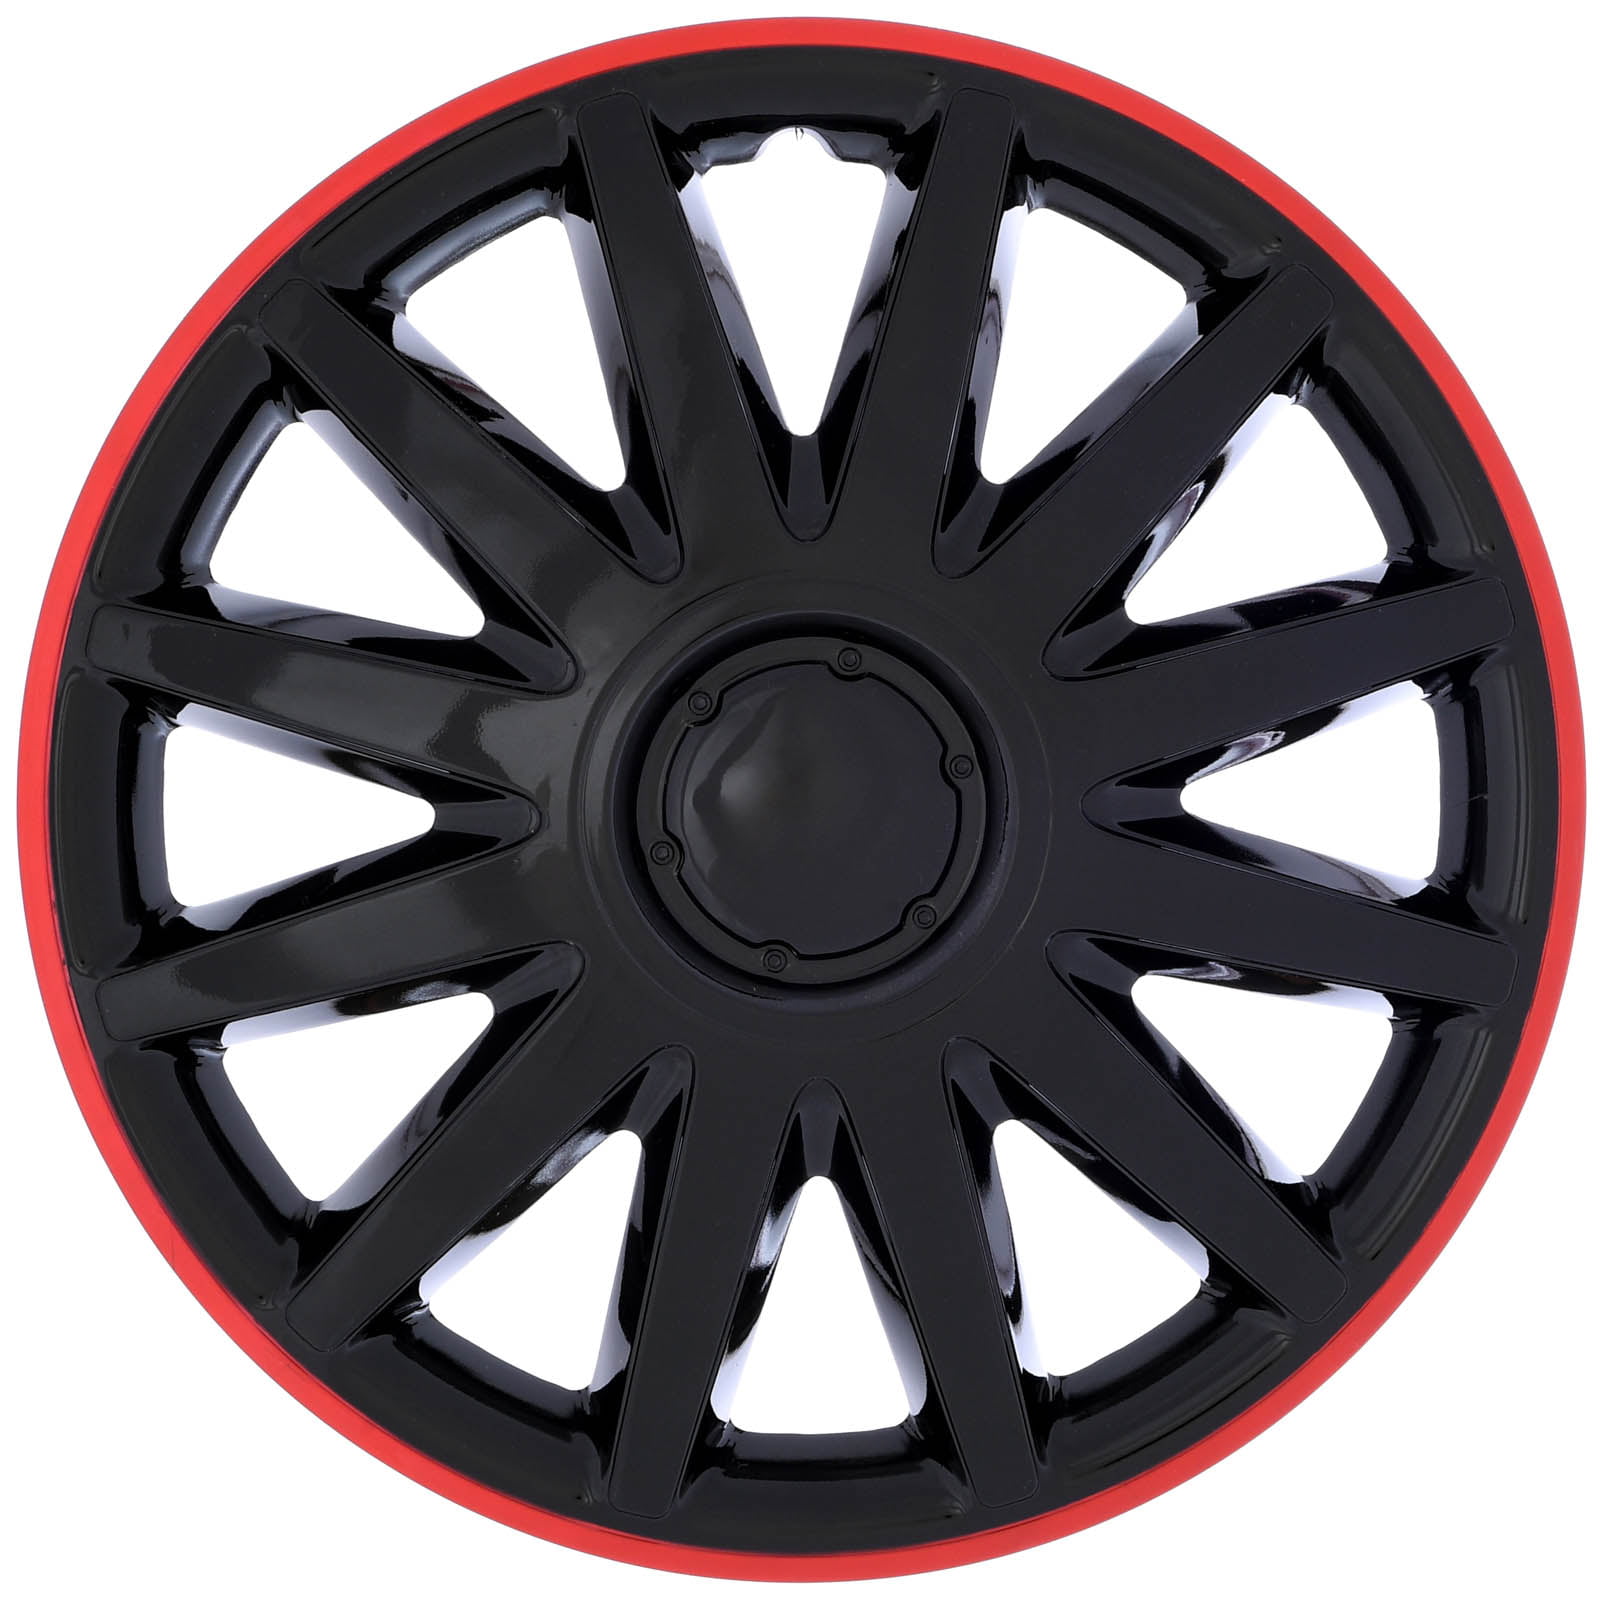 Valve caps & Sticker XtremeAuto® 14 Black With Red Wheel car Hub Trims Cover Set of 4 Complete with Ties